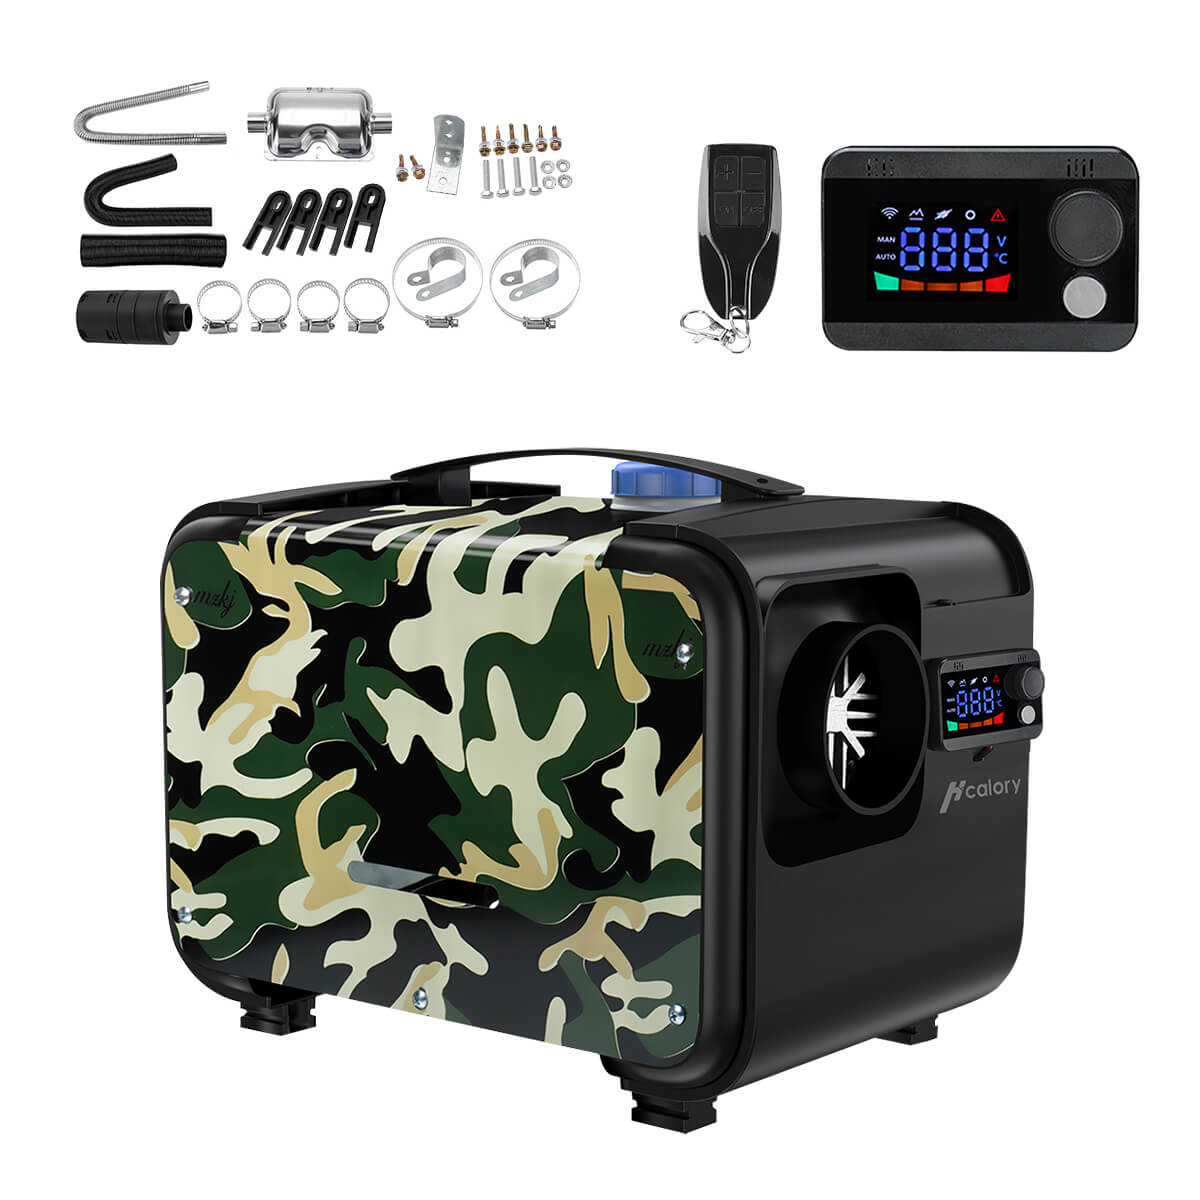 M18 Diesel Heater, Camouflage Fast Ignition All In One